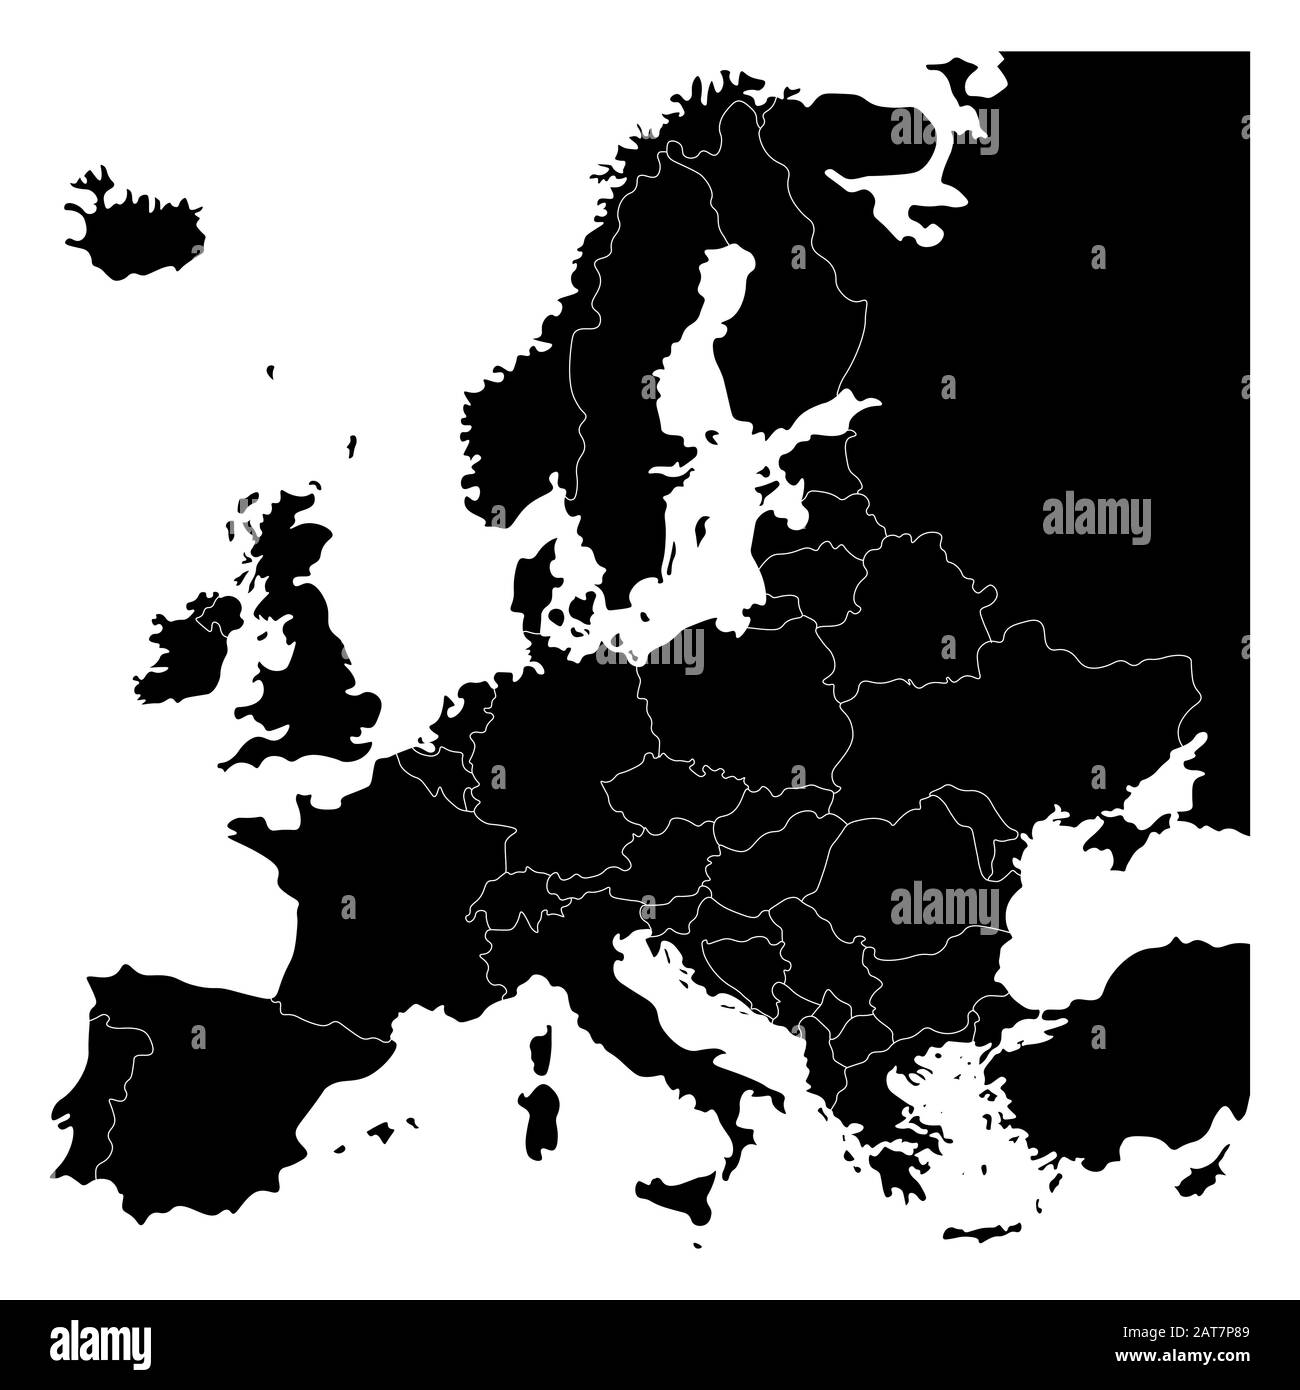 European continent map. Country borders and europe. Isolated vector illustration in black color. Stock Vector